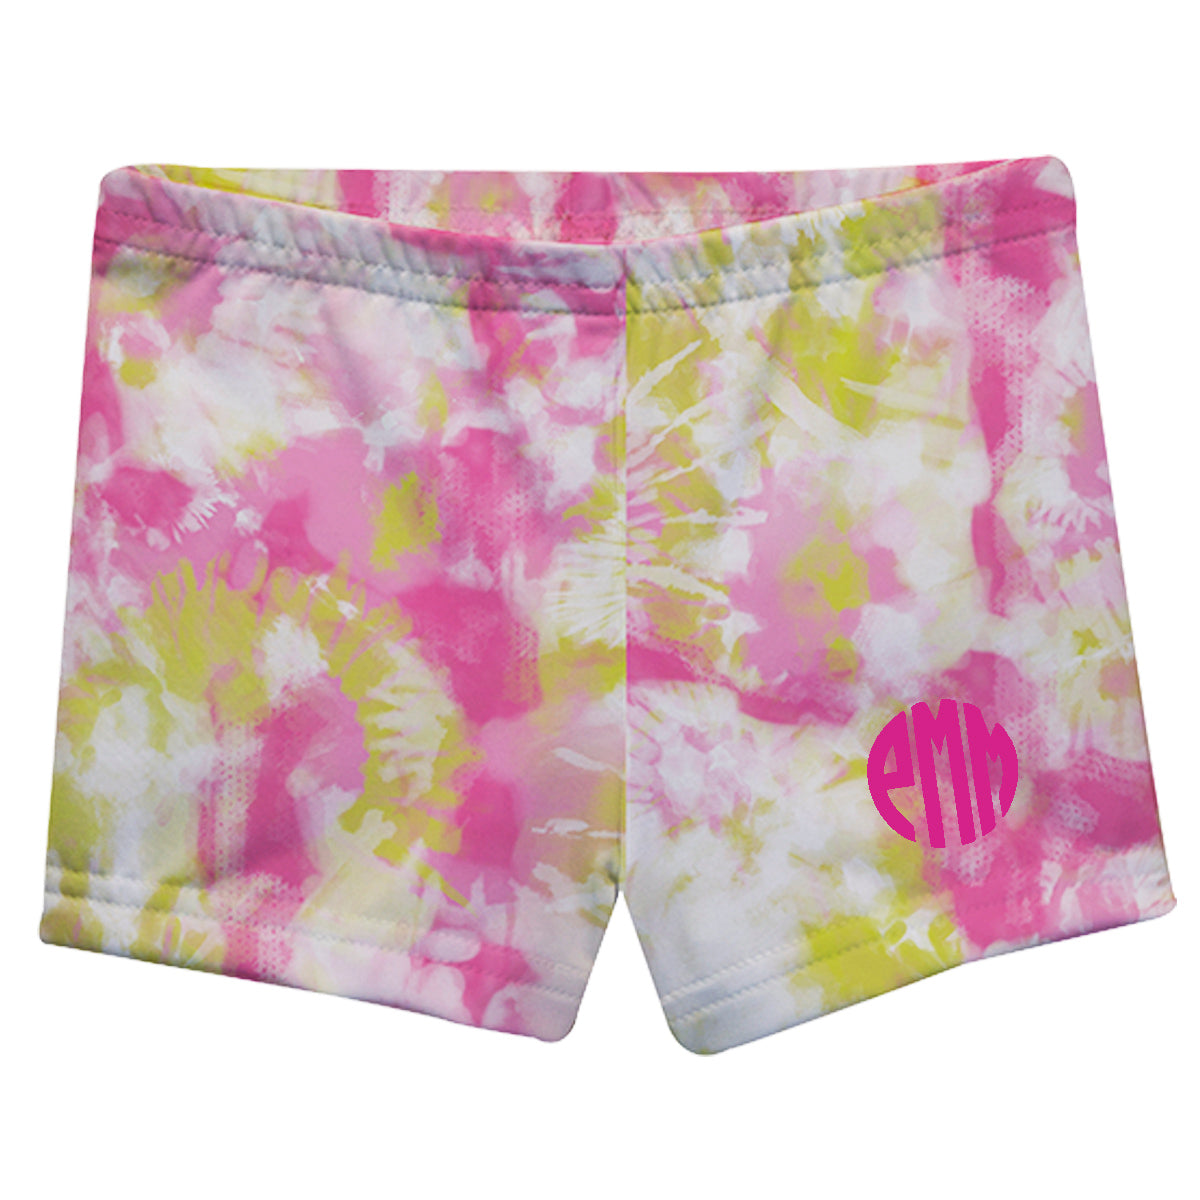 Monogram Pink and Yellow Tie Dye Shorties - Wimziy&Co.